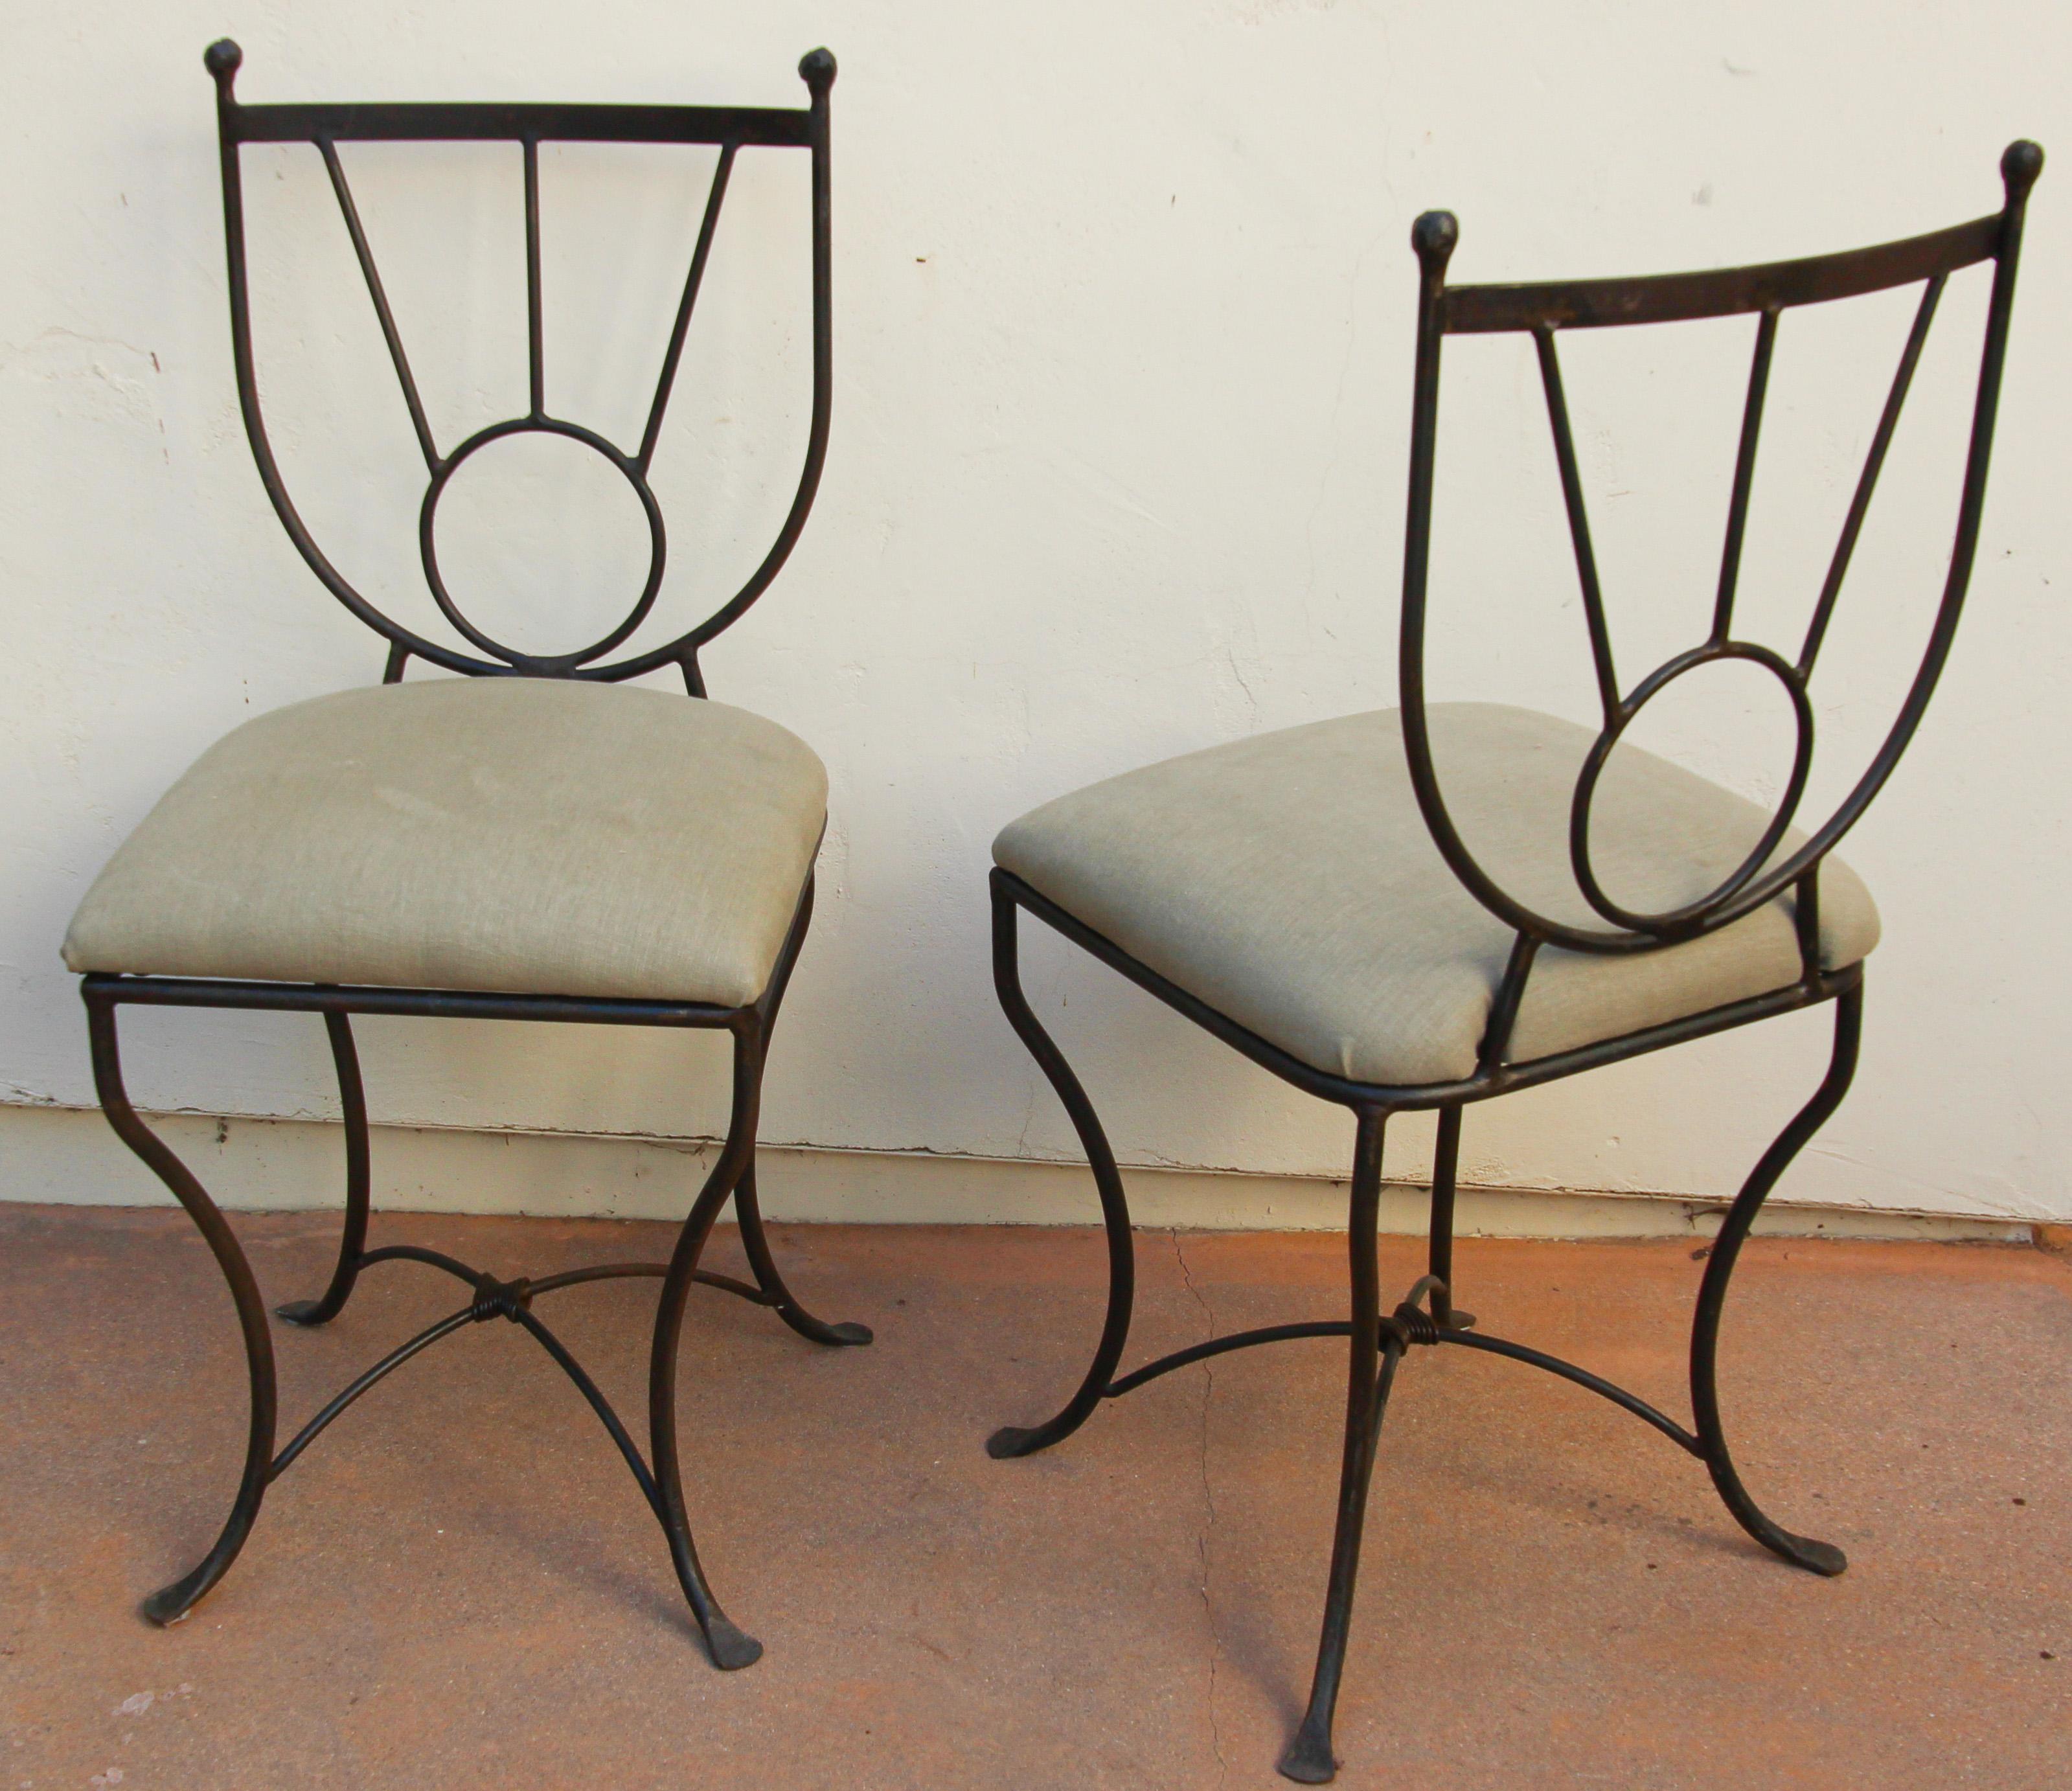 Mid-20th Century Outdoor Wrought Iron Chairs Set of Four in Mario Papperzini Style